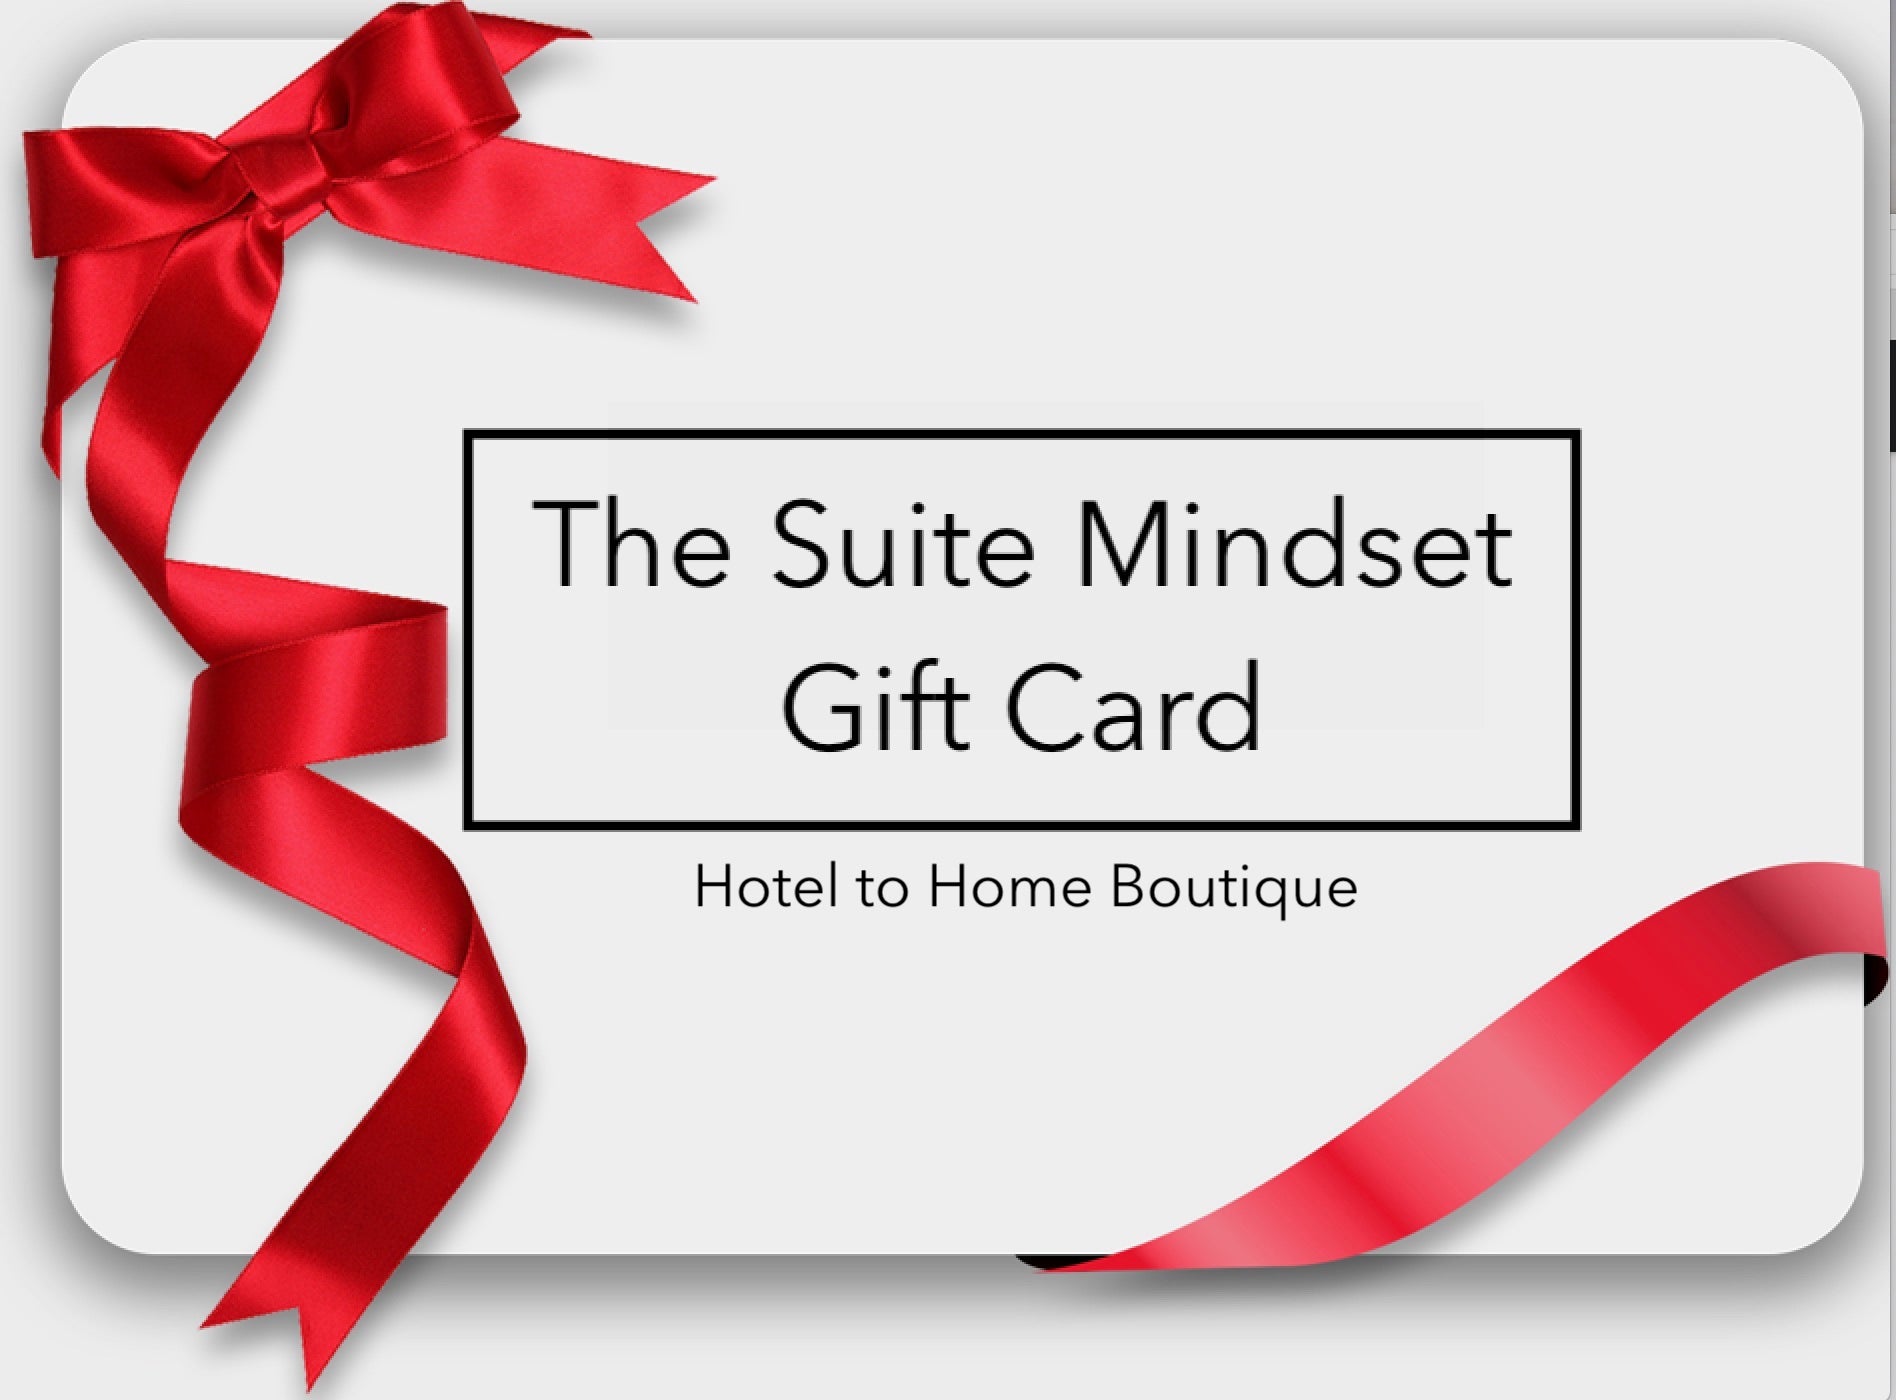 The Suite Mindset gift card